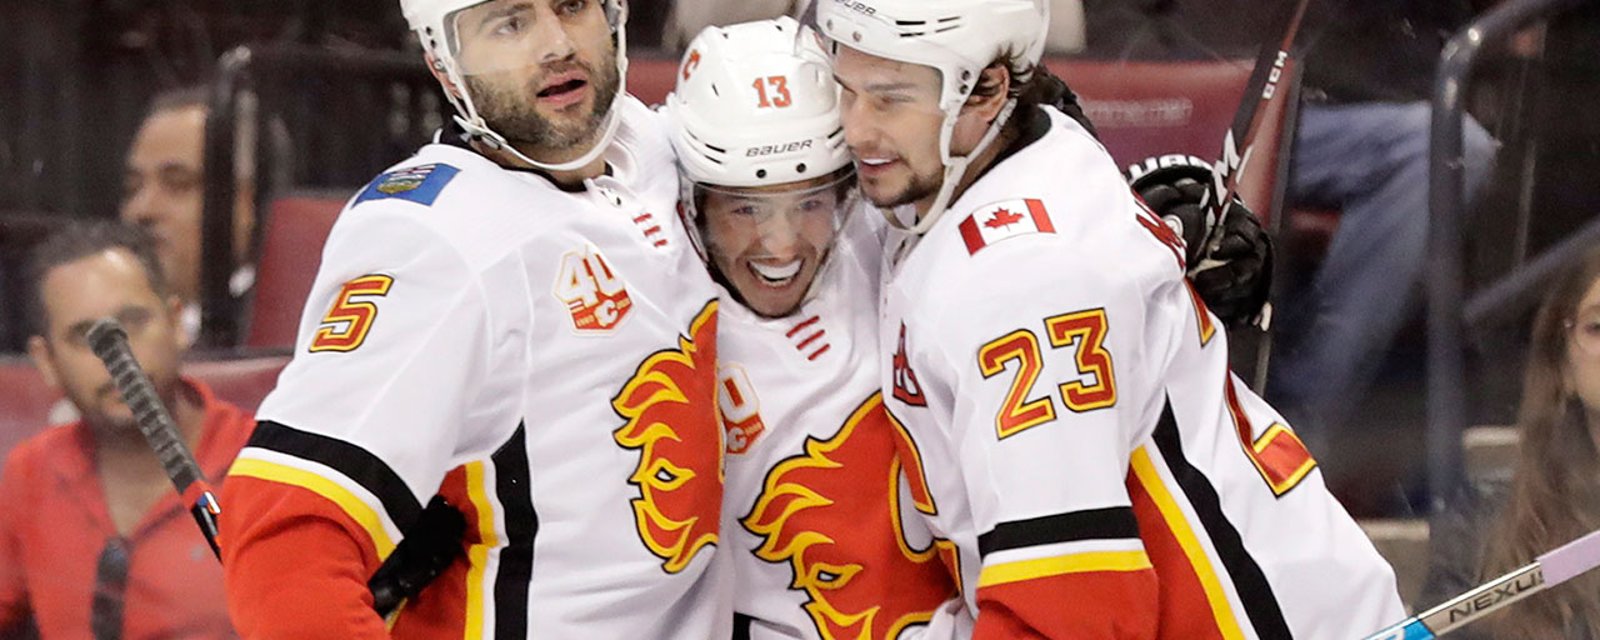 Rumor: Johnny Gaudreau has played his final game as a Flame.